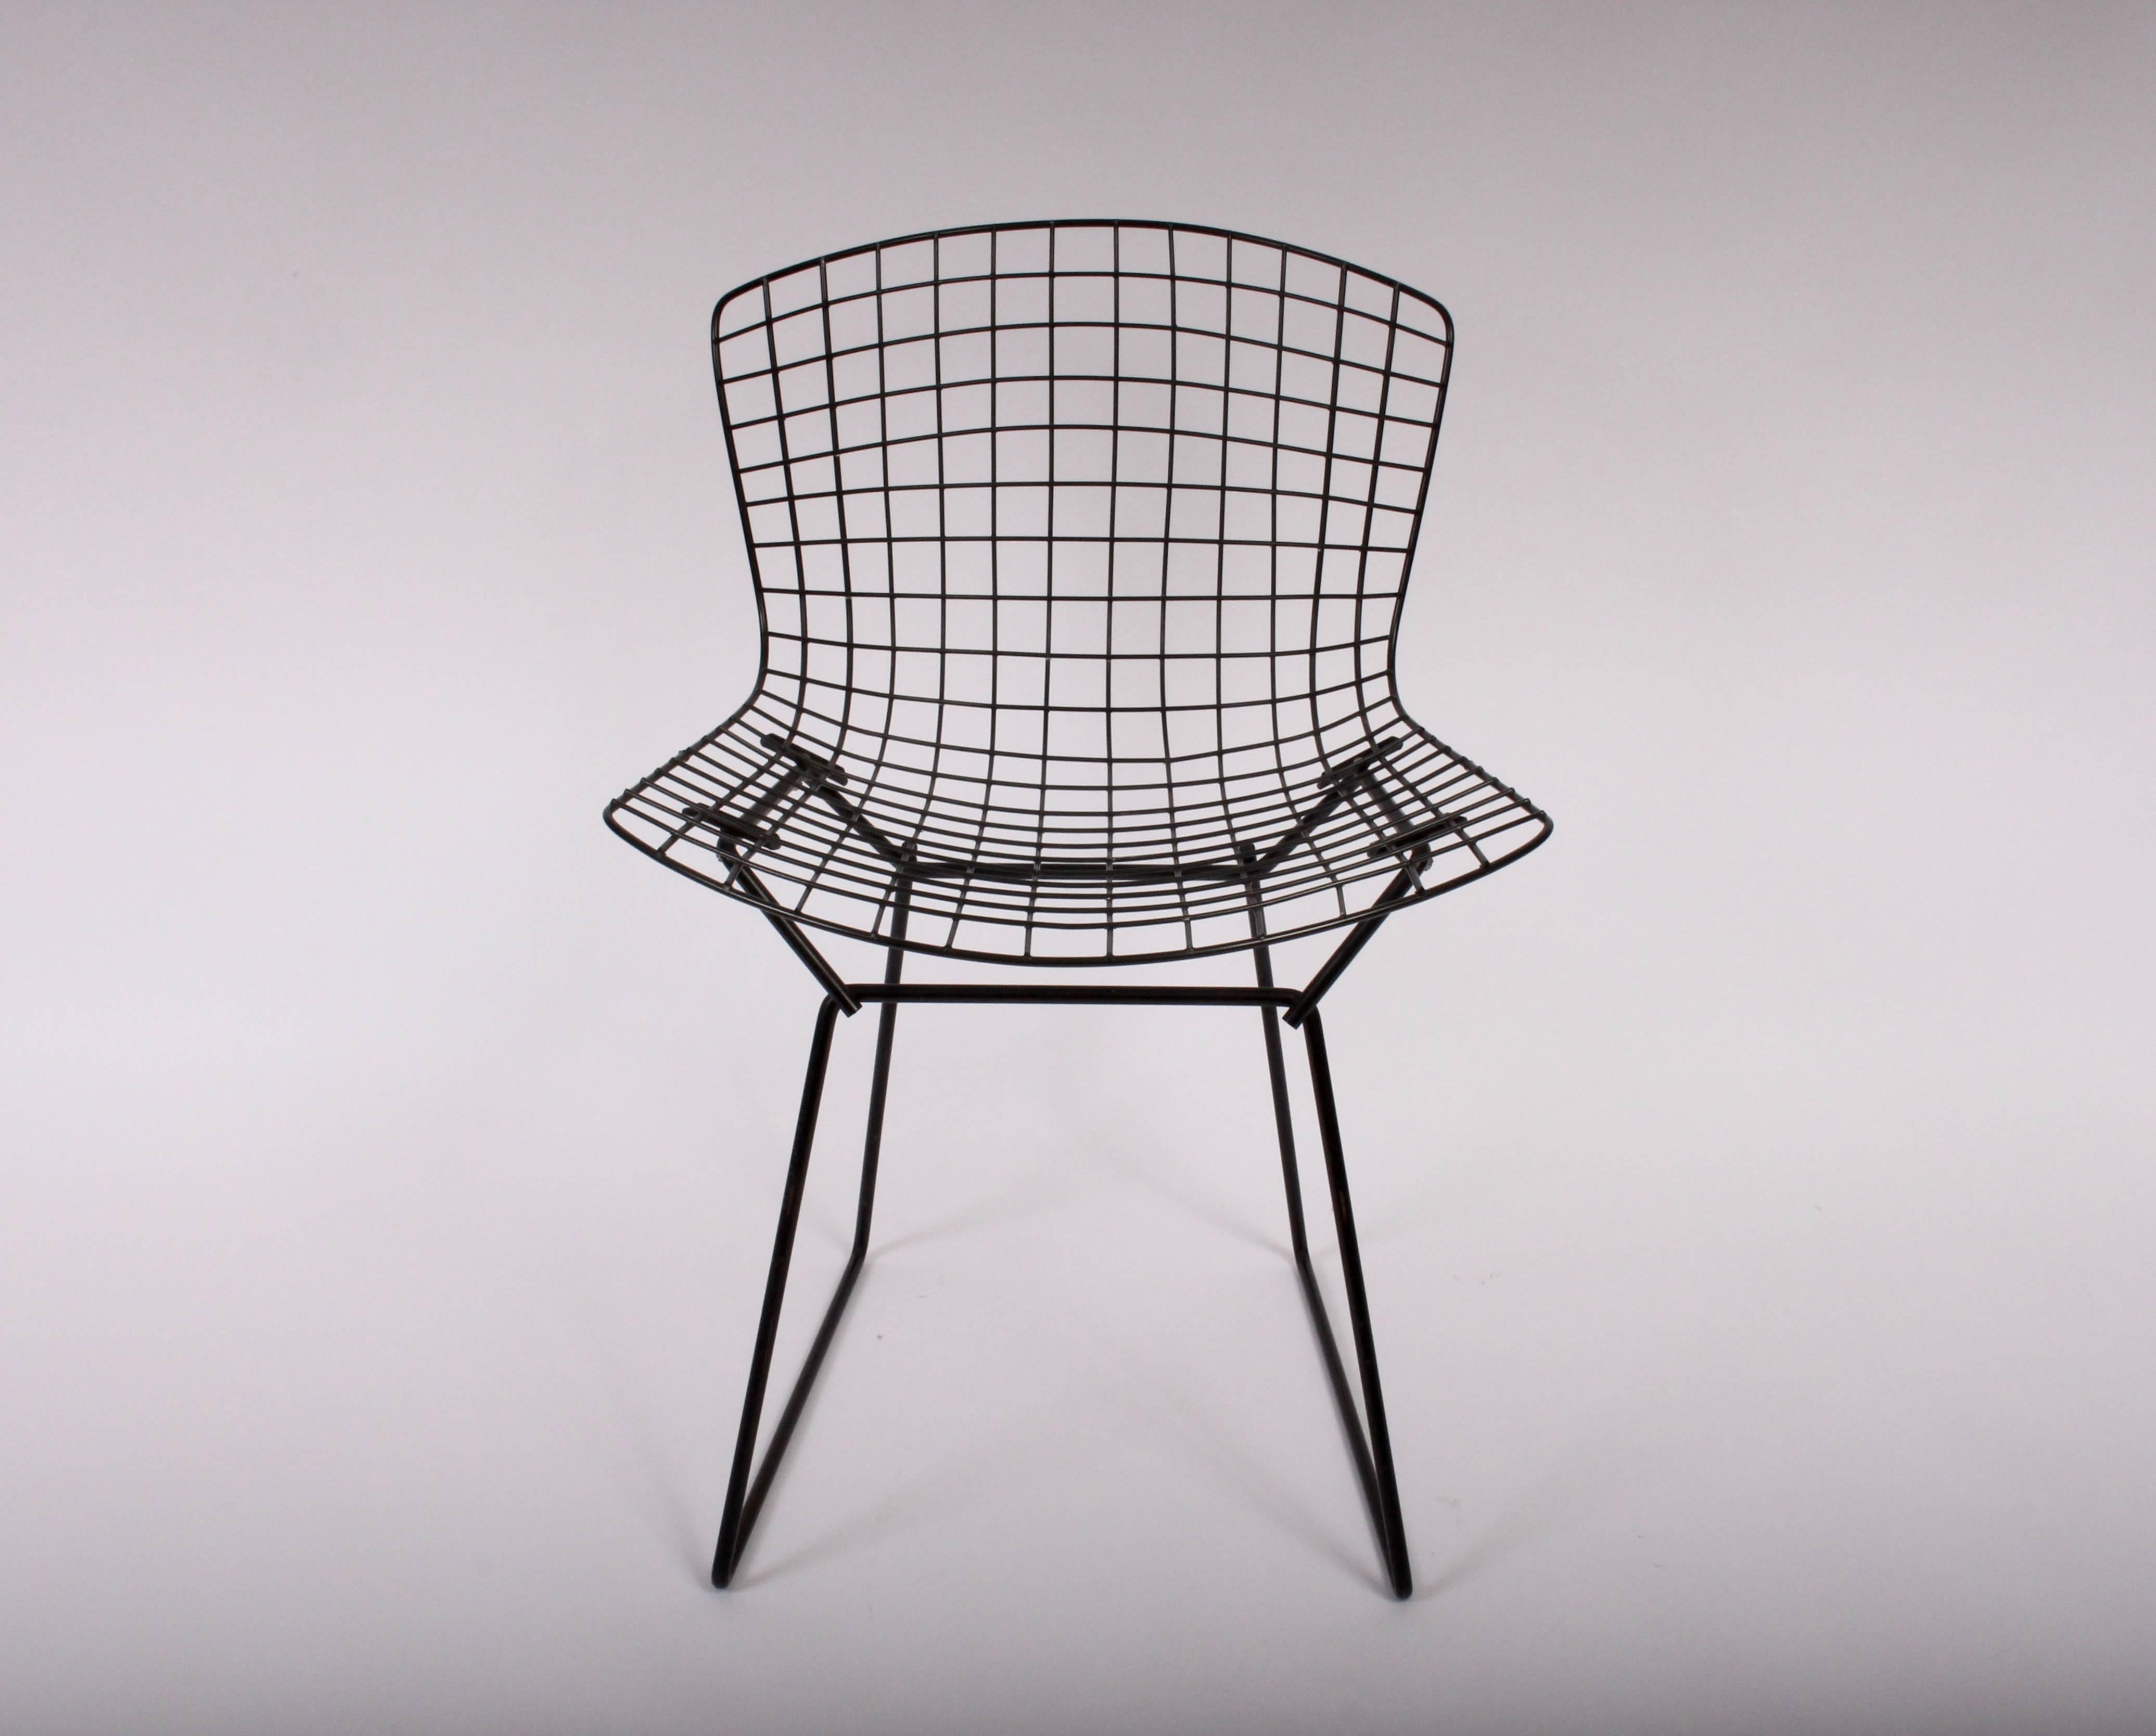 Early set of twelve Harry Bertoia for Knoll indoor outdoor black wire dining chairs with 2-piece chair pads. Featuring classic enameled black wire frame with original two-piece black vinyl seat and back cushions. Foam needs replacement. Most vinyl